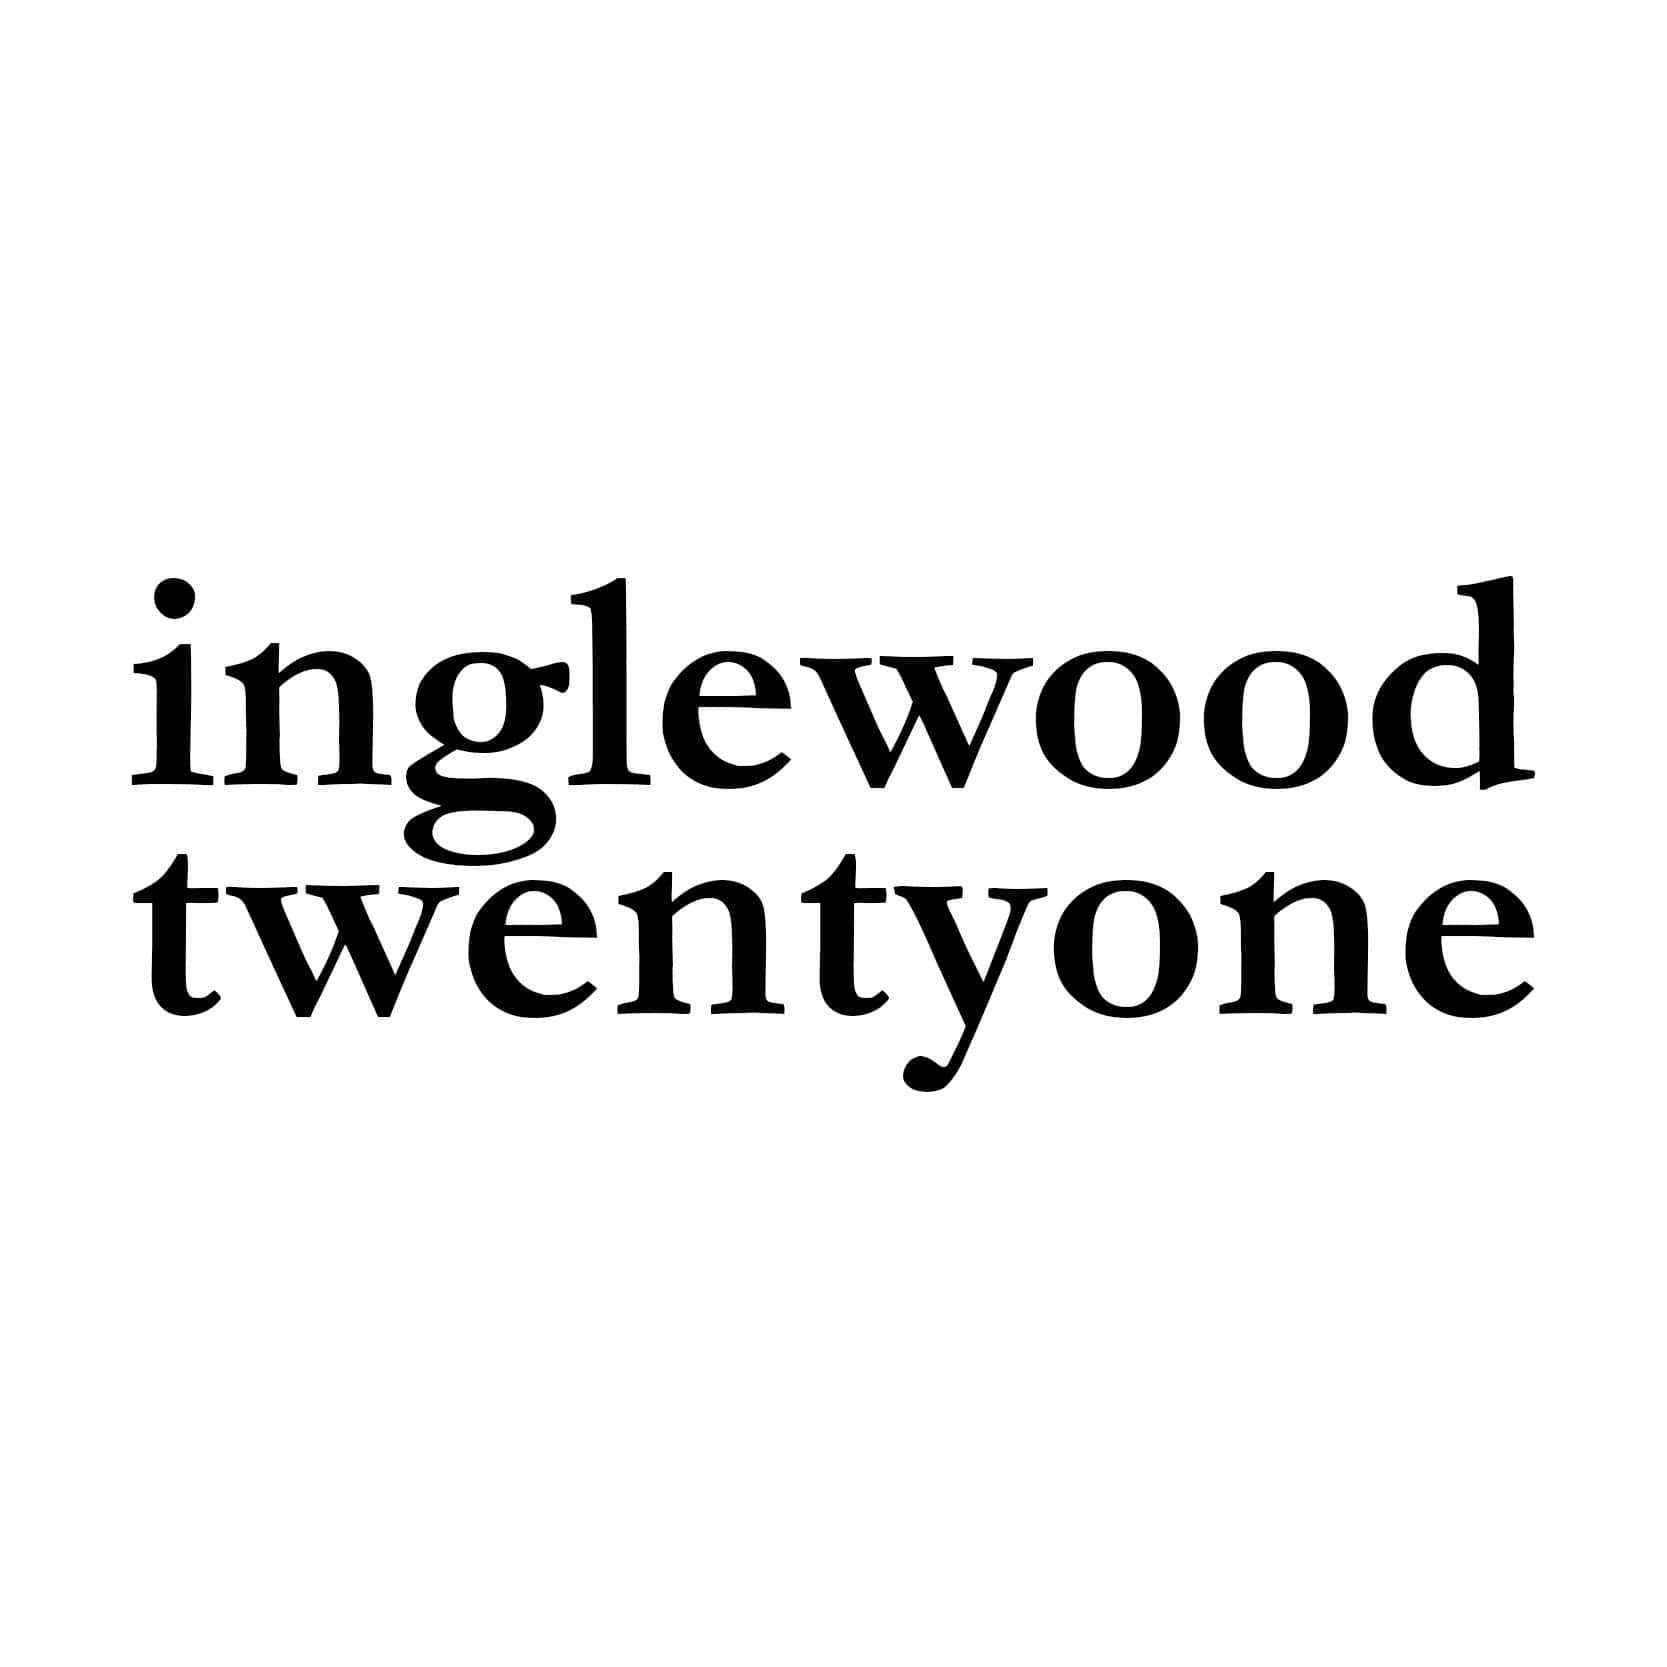 18-03 - Inglewood 21 - Content Cover-min.jpg